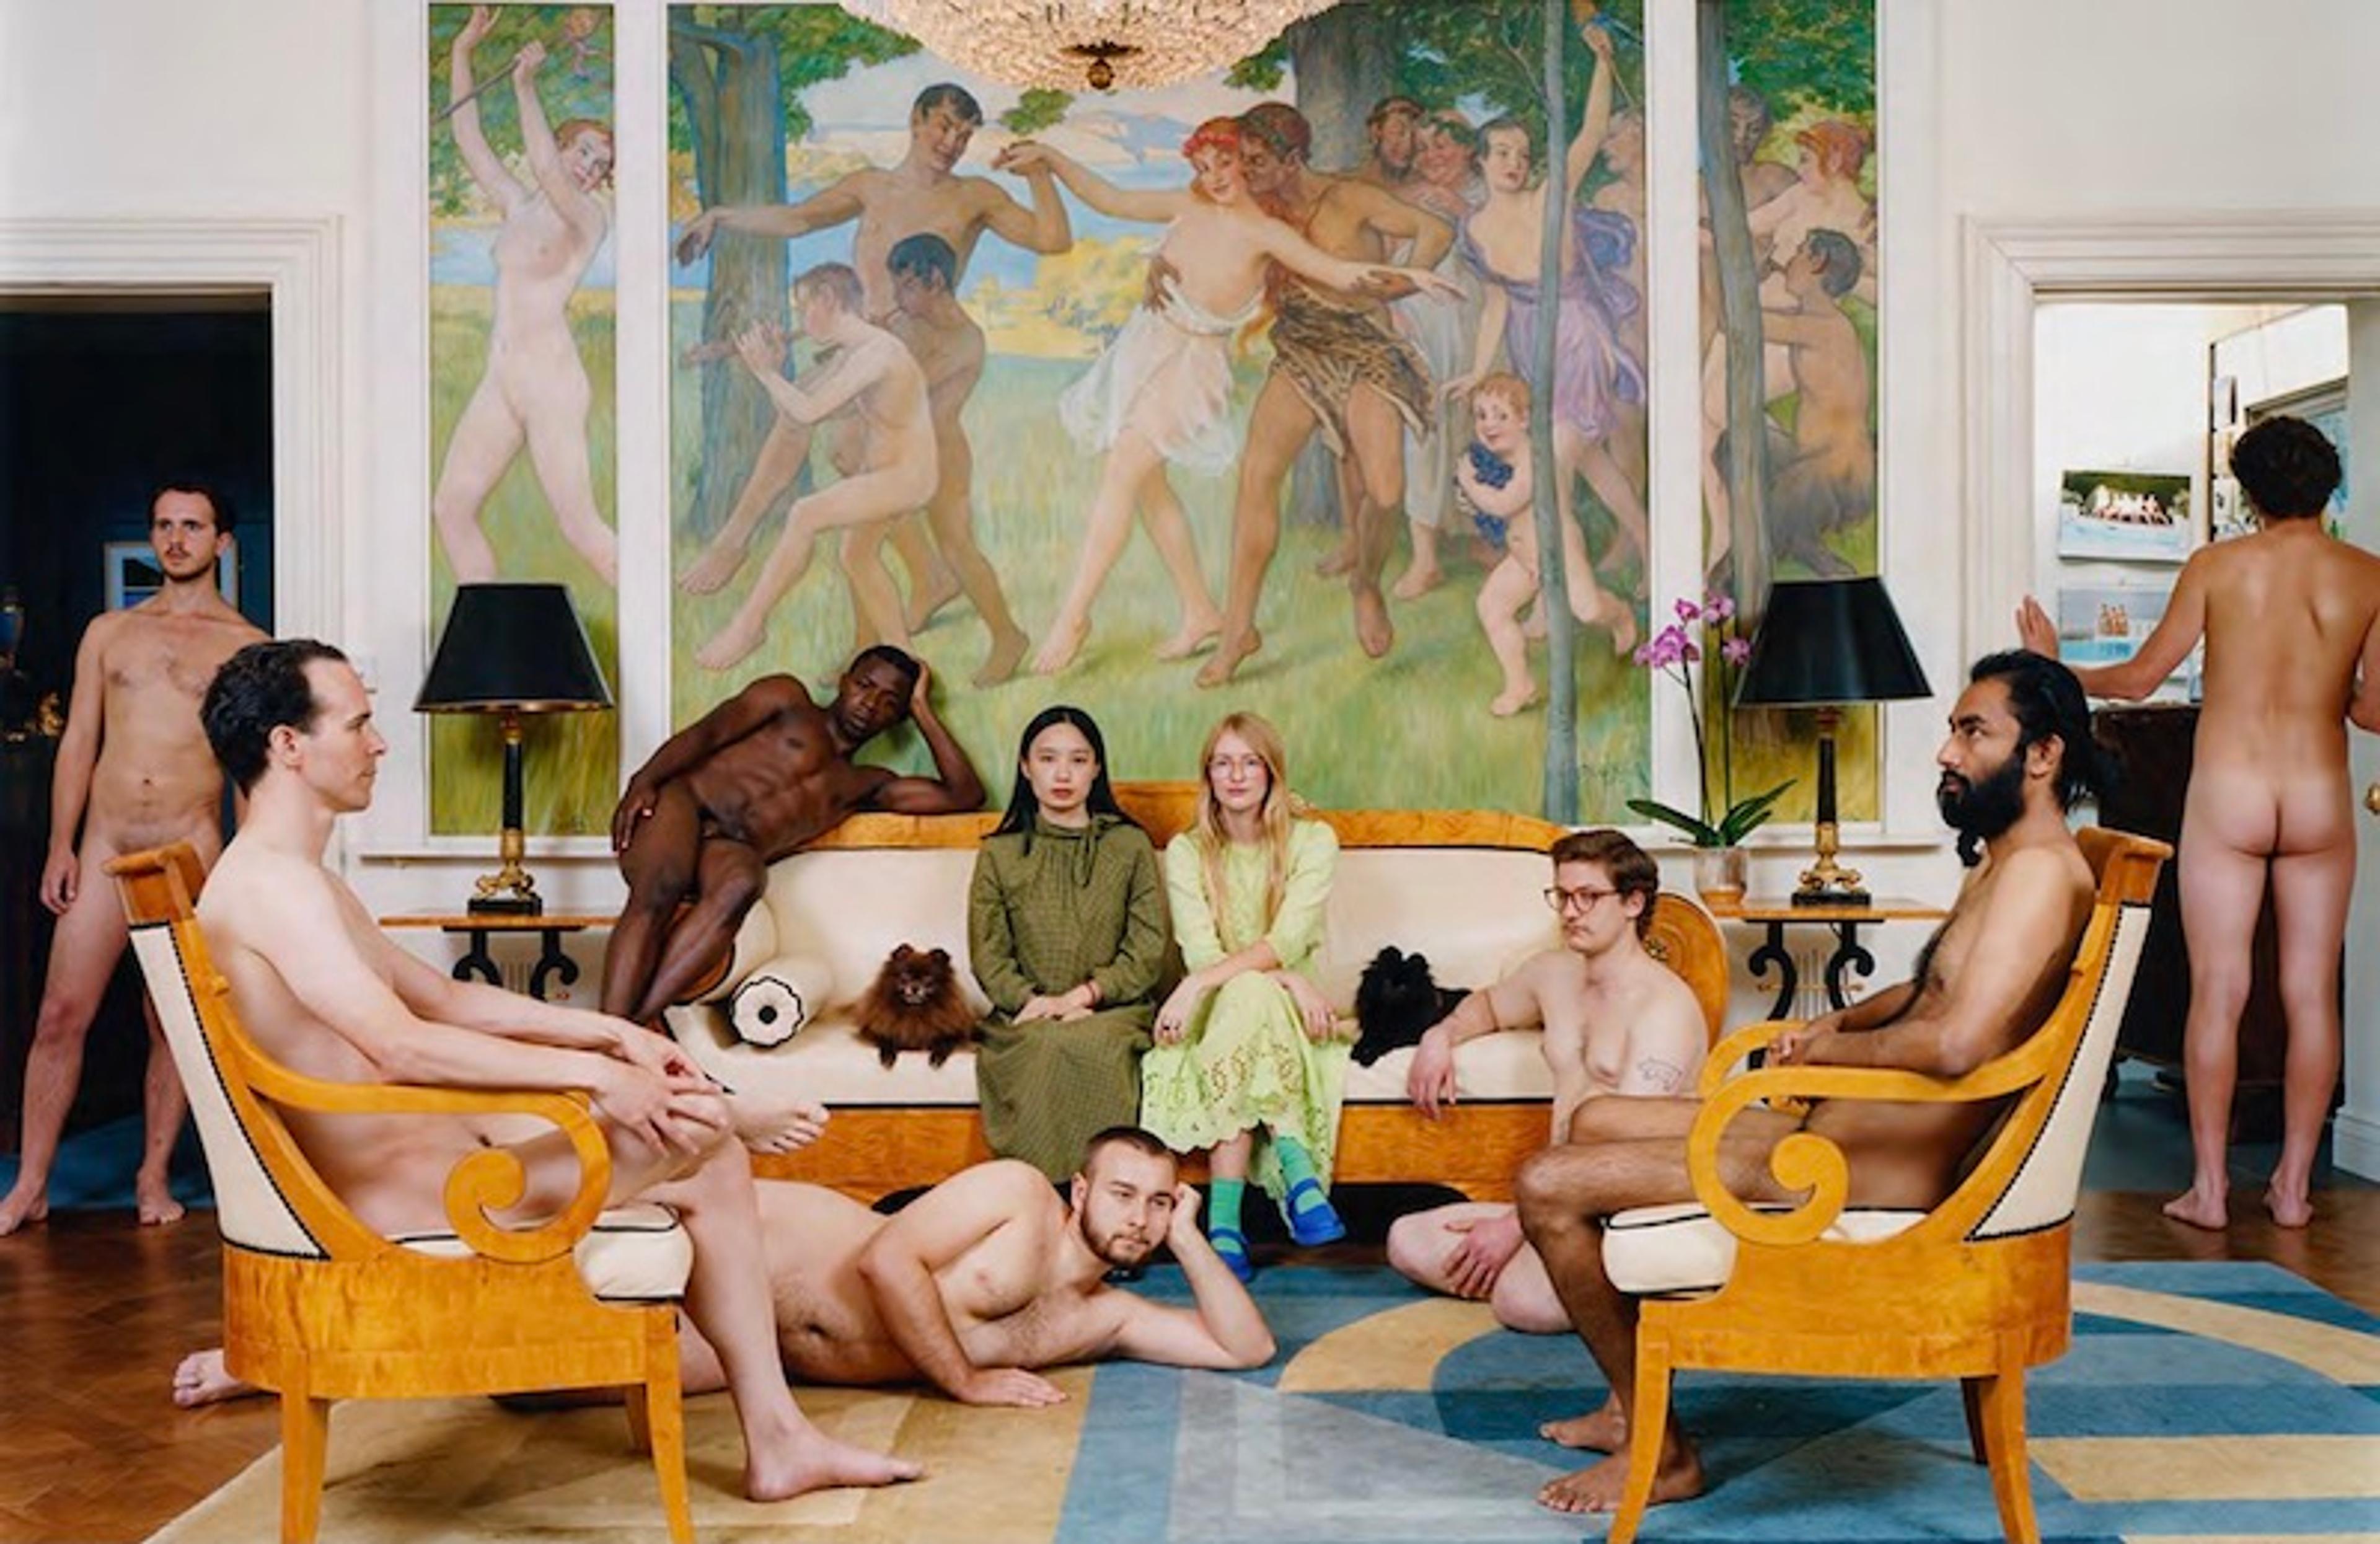 An image of two women wearing green dresses in a living room, surrounded by several nude men